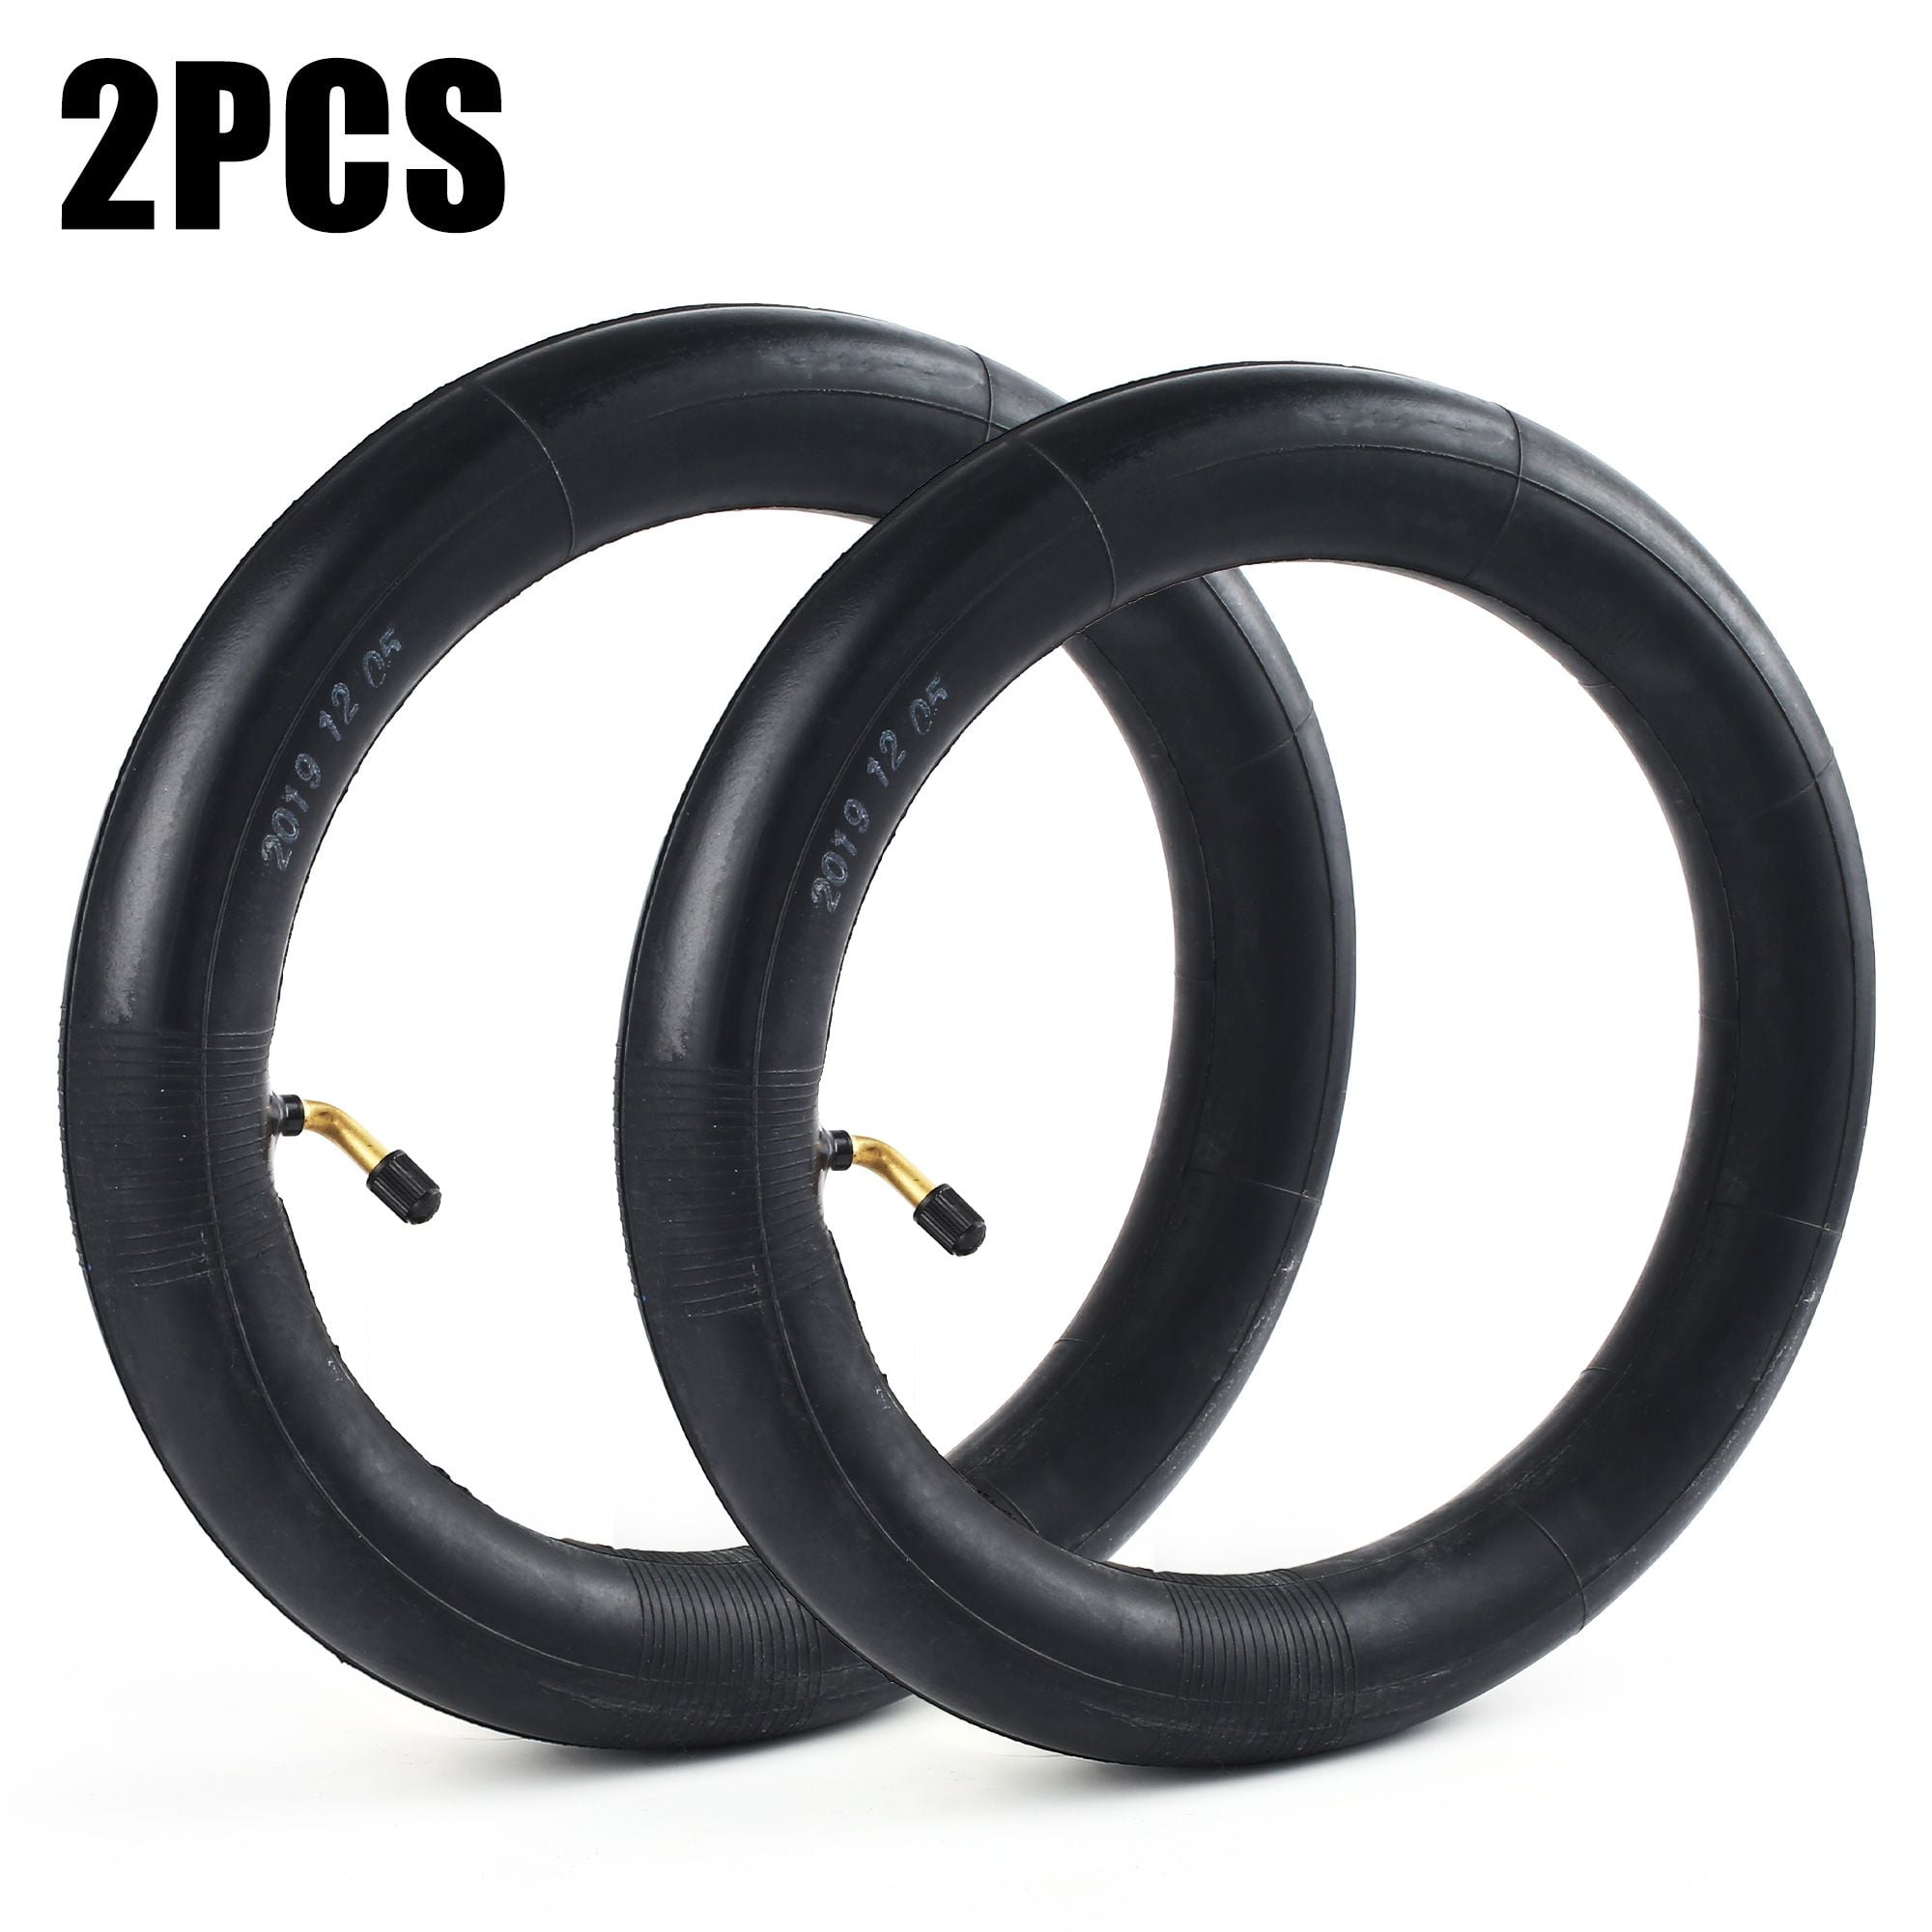 Scooter Tire s 12-1/2''x2-1/4'' Inch Inner Tube Bent Stem Fits 57-203/62-203 